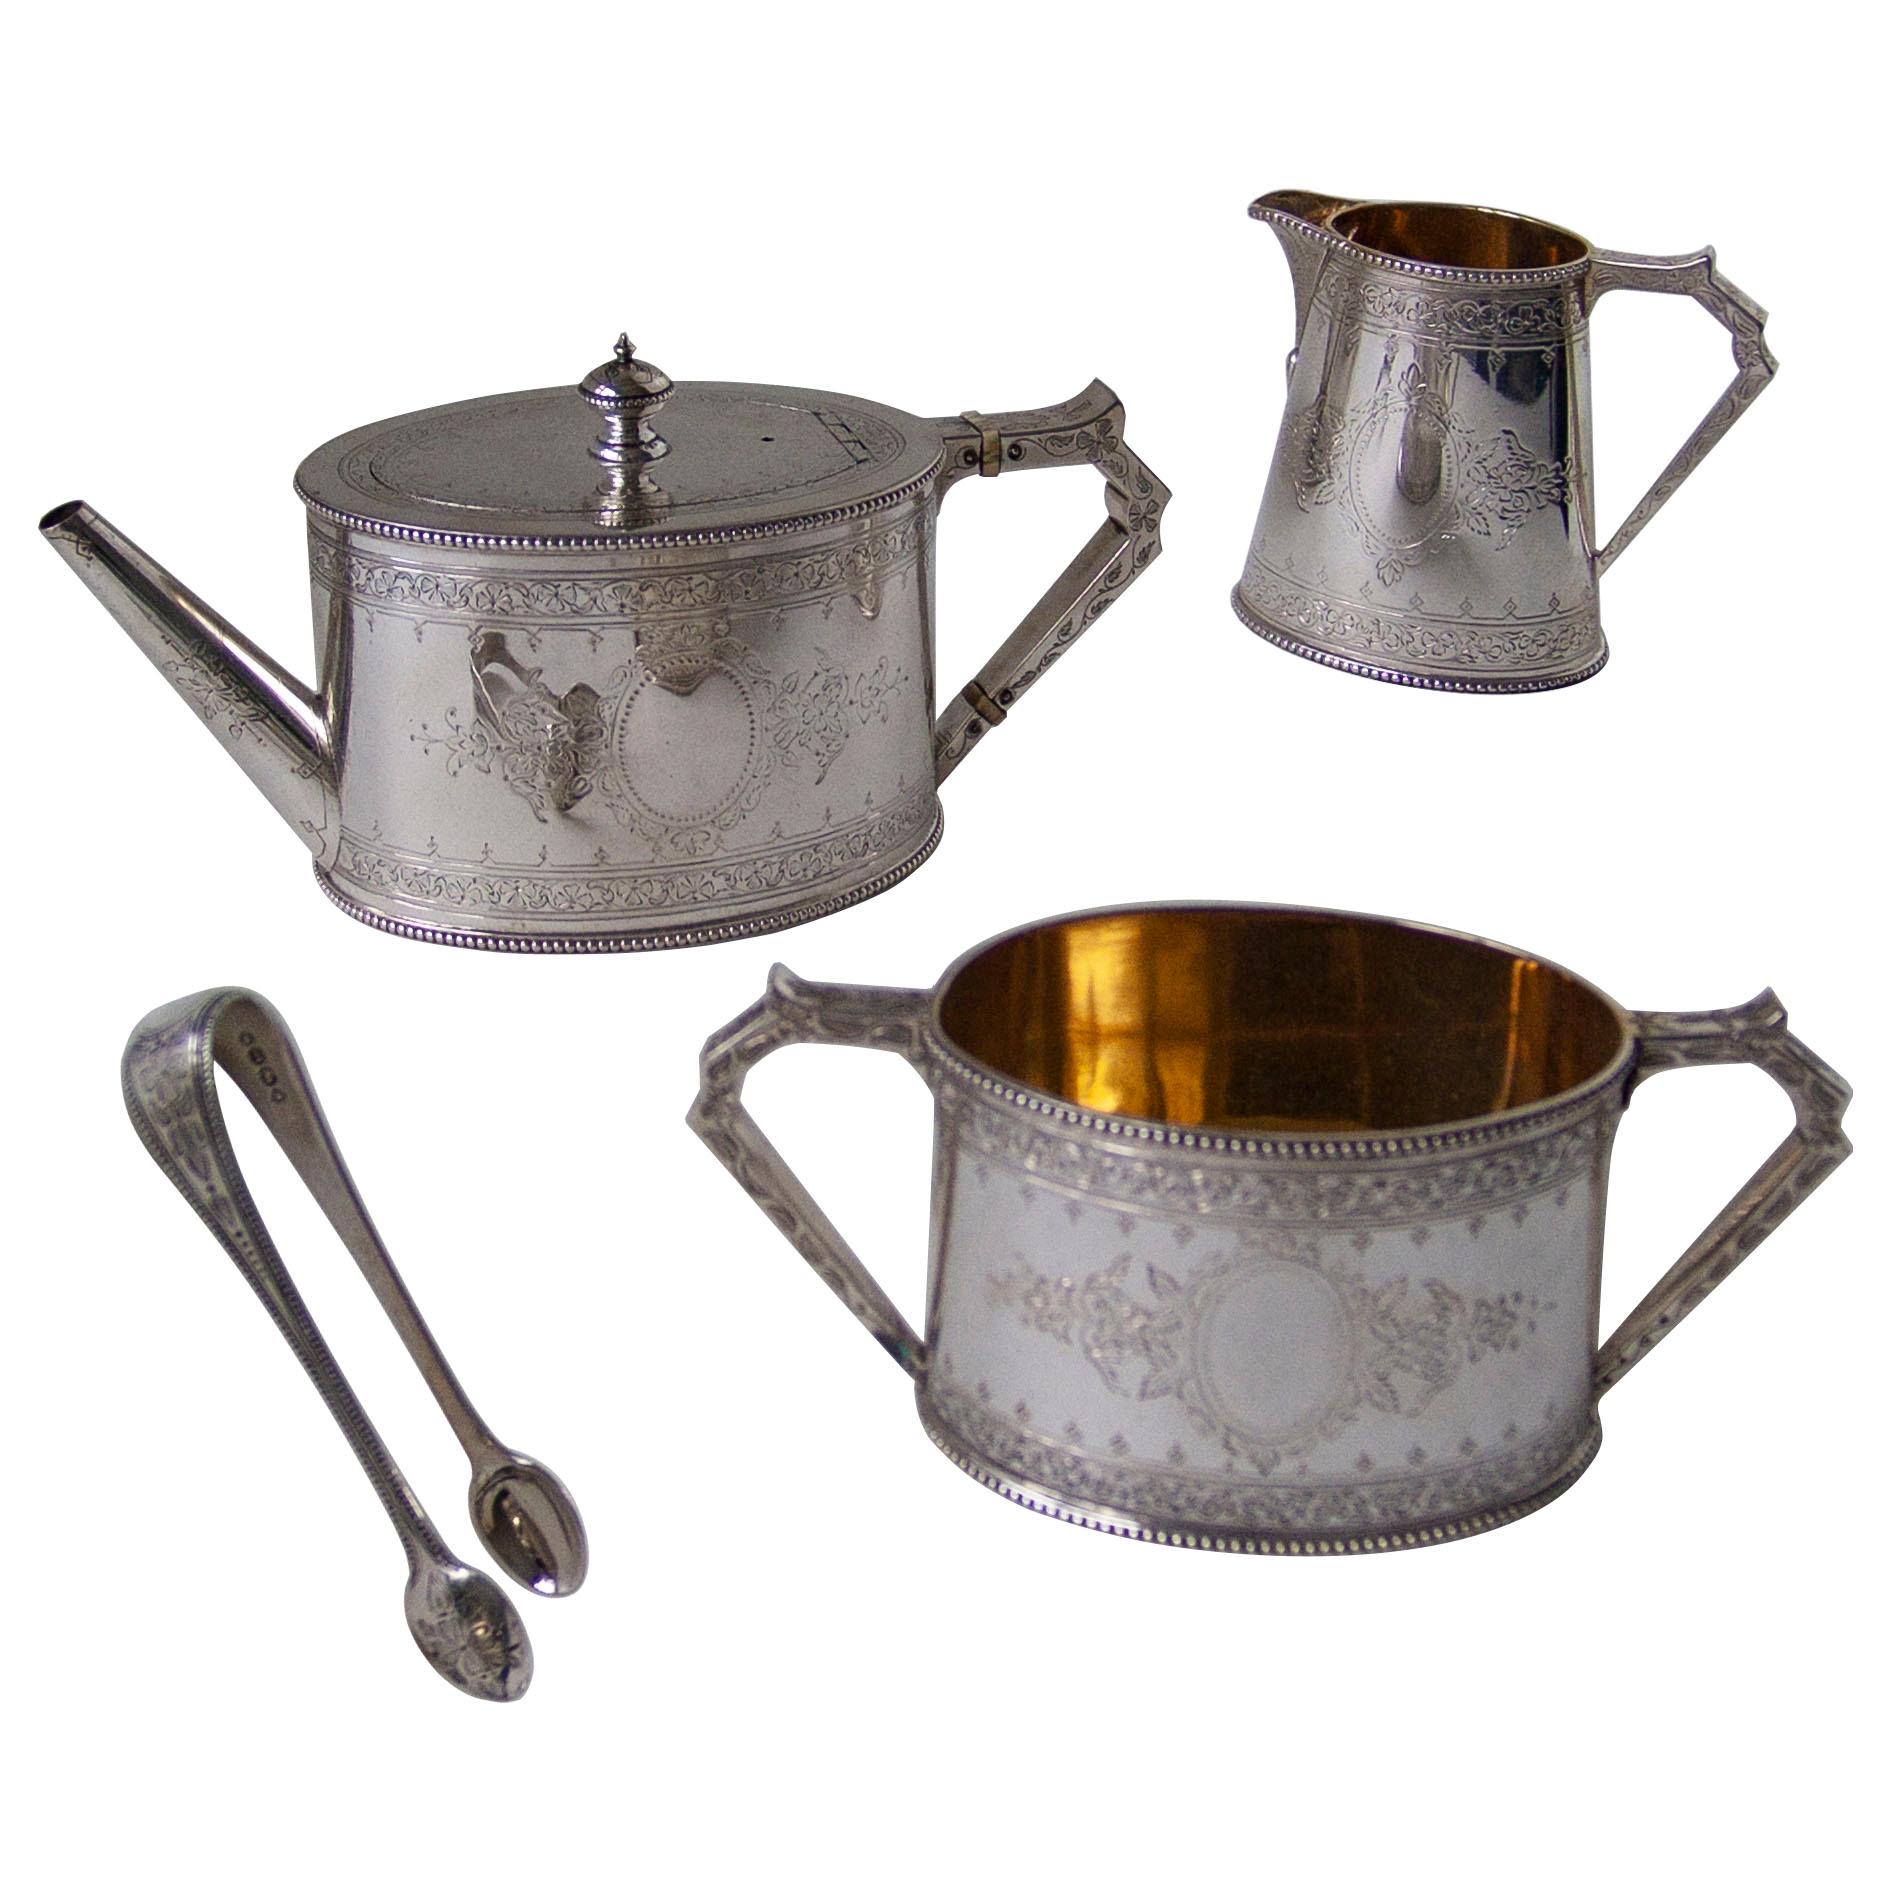 A very good Victorian sterling silver can shaped tea set comprising a silver handled teapot, cream jug, sugar basin and sugar tongs all housed in original presentation case. Each piece is embellished with bright-cut engraving. The cream jug and